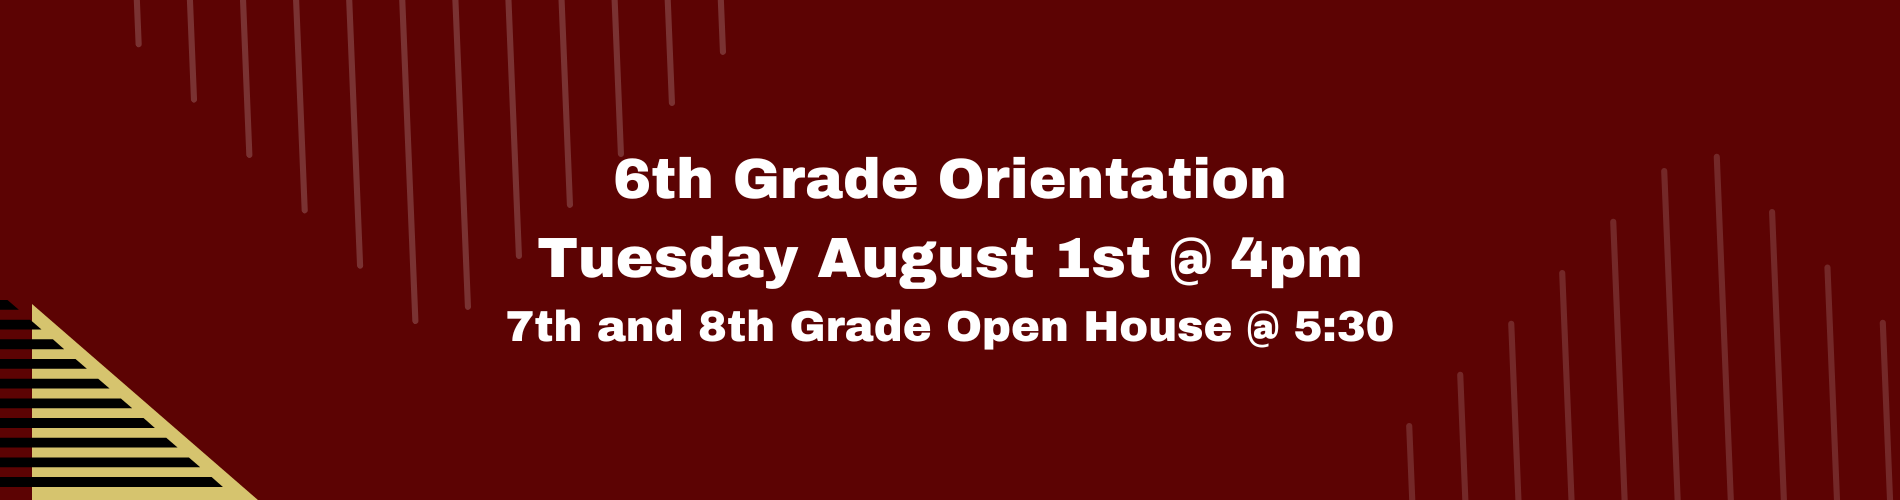 Orientation and Open House 